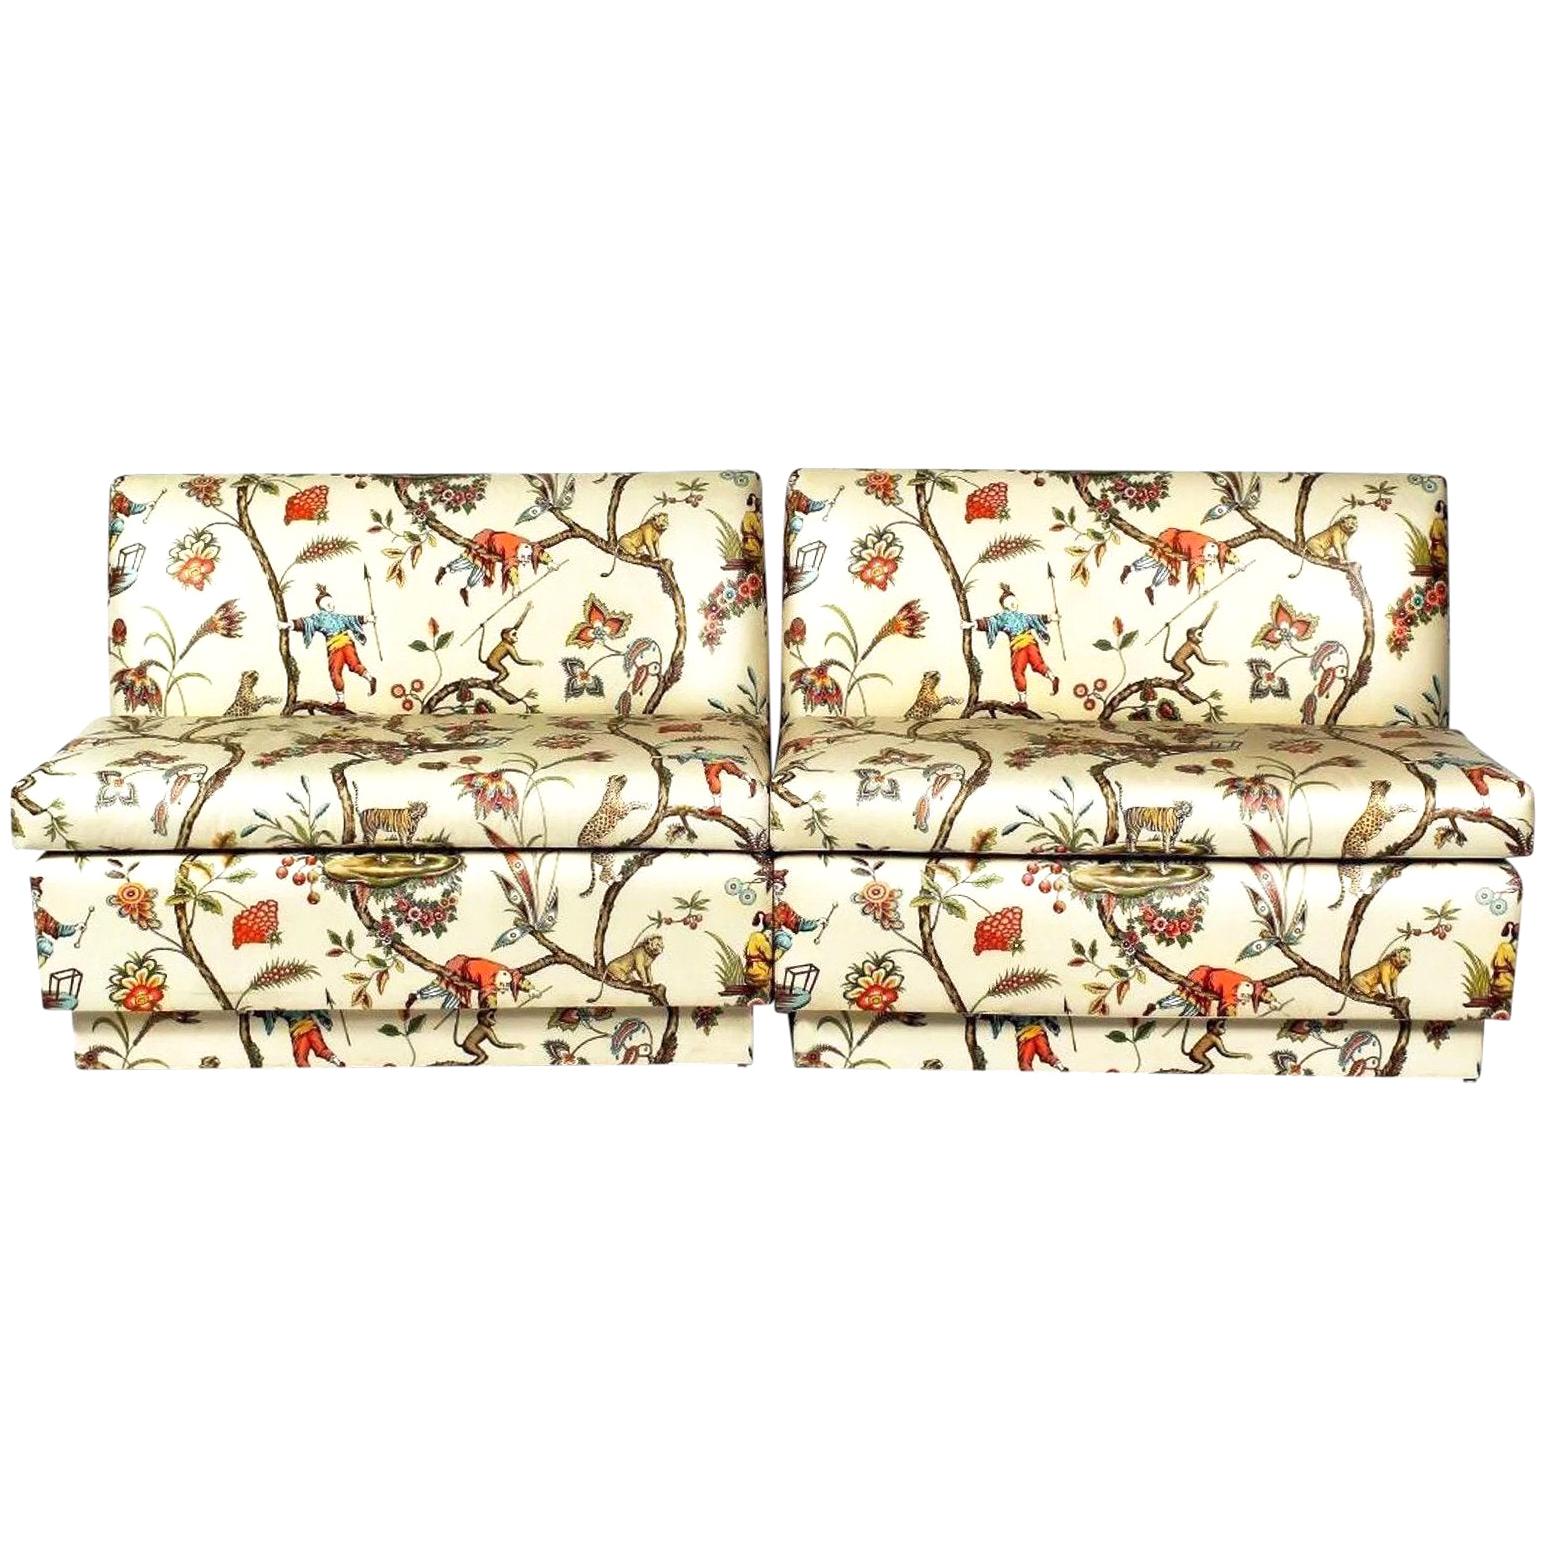 Chinoiserie Scalamandre Modern Polished Cotton Cream Banquette Bench